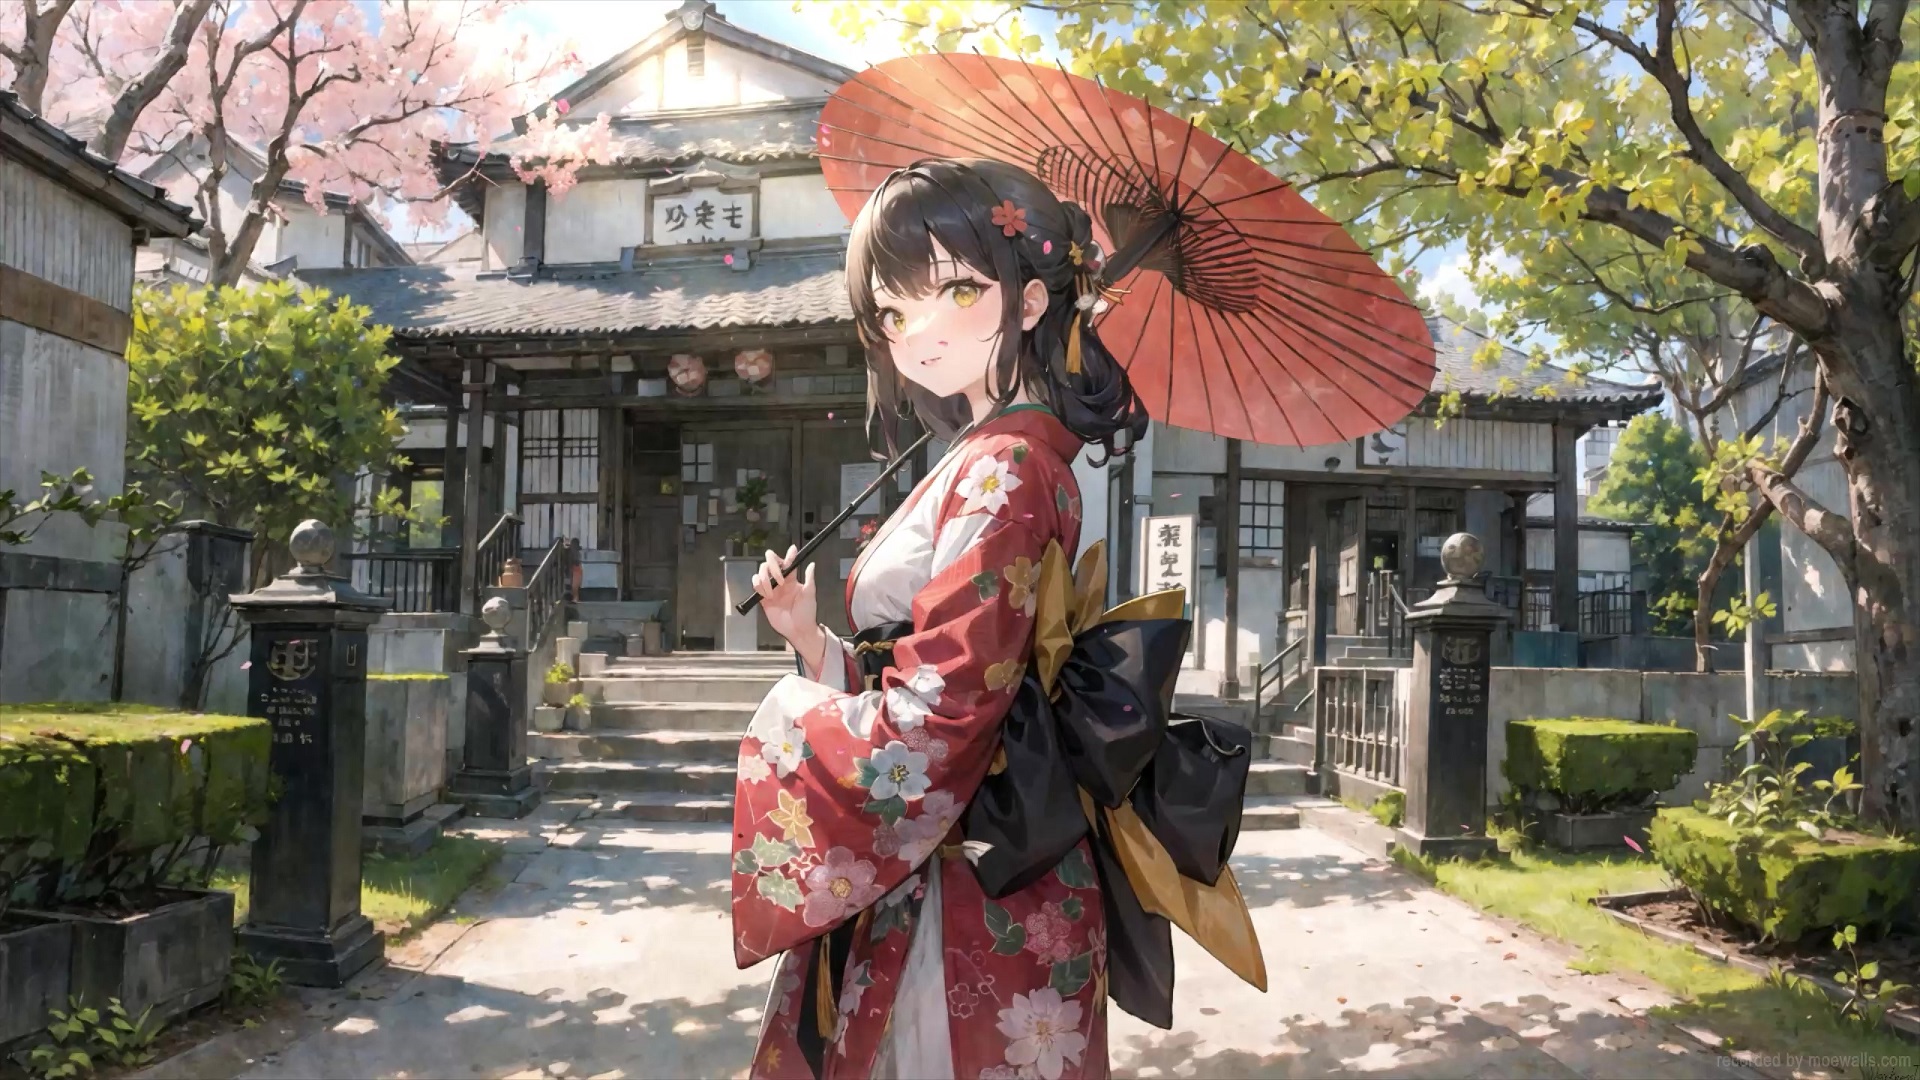 HD wallpaper: anime girl, kimono, japanese outfit, real people, one person  | Wallpaper Flare